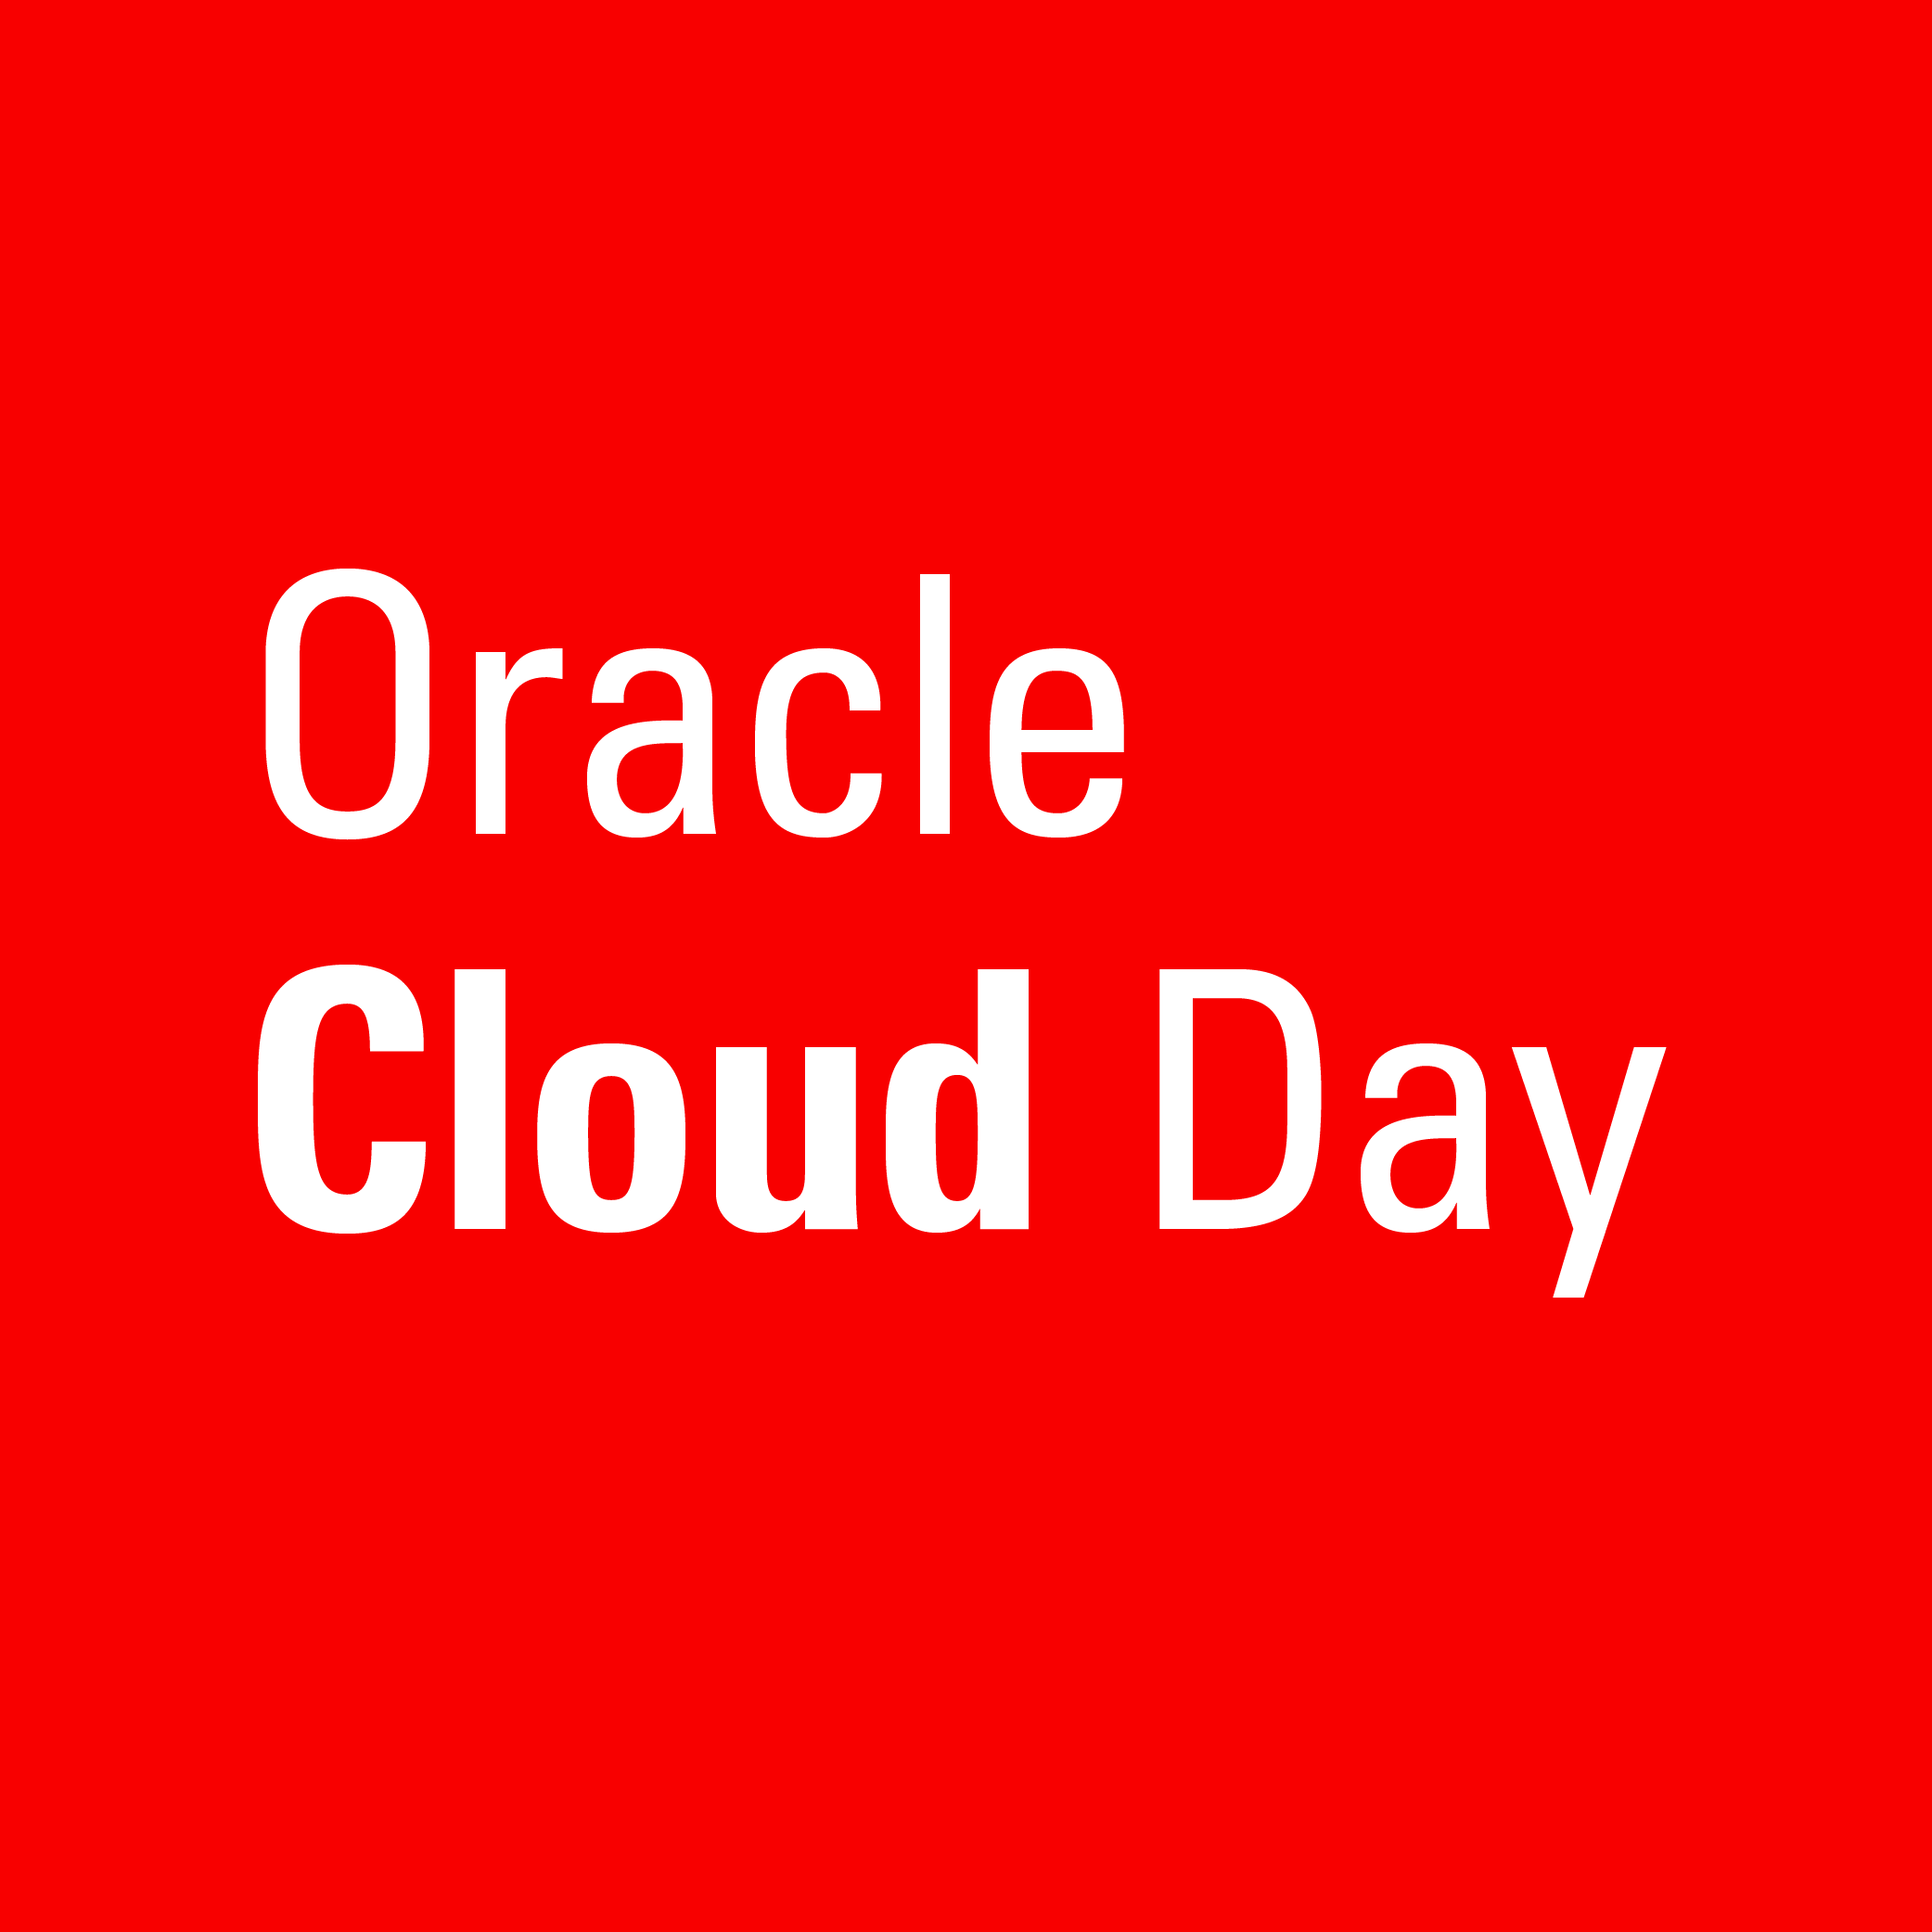 Join AST at Oracle Cloud Day in Dallas!